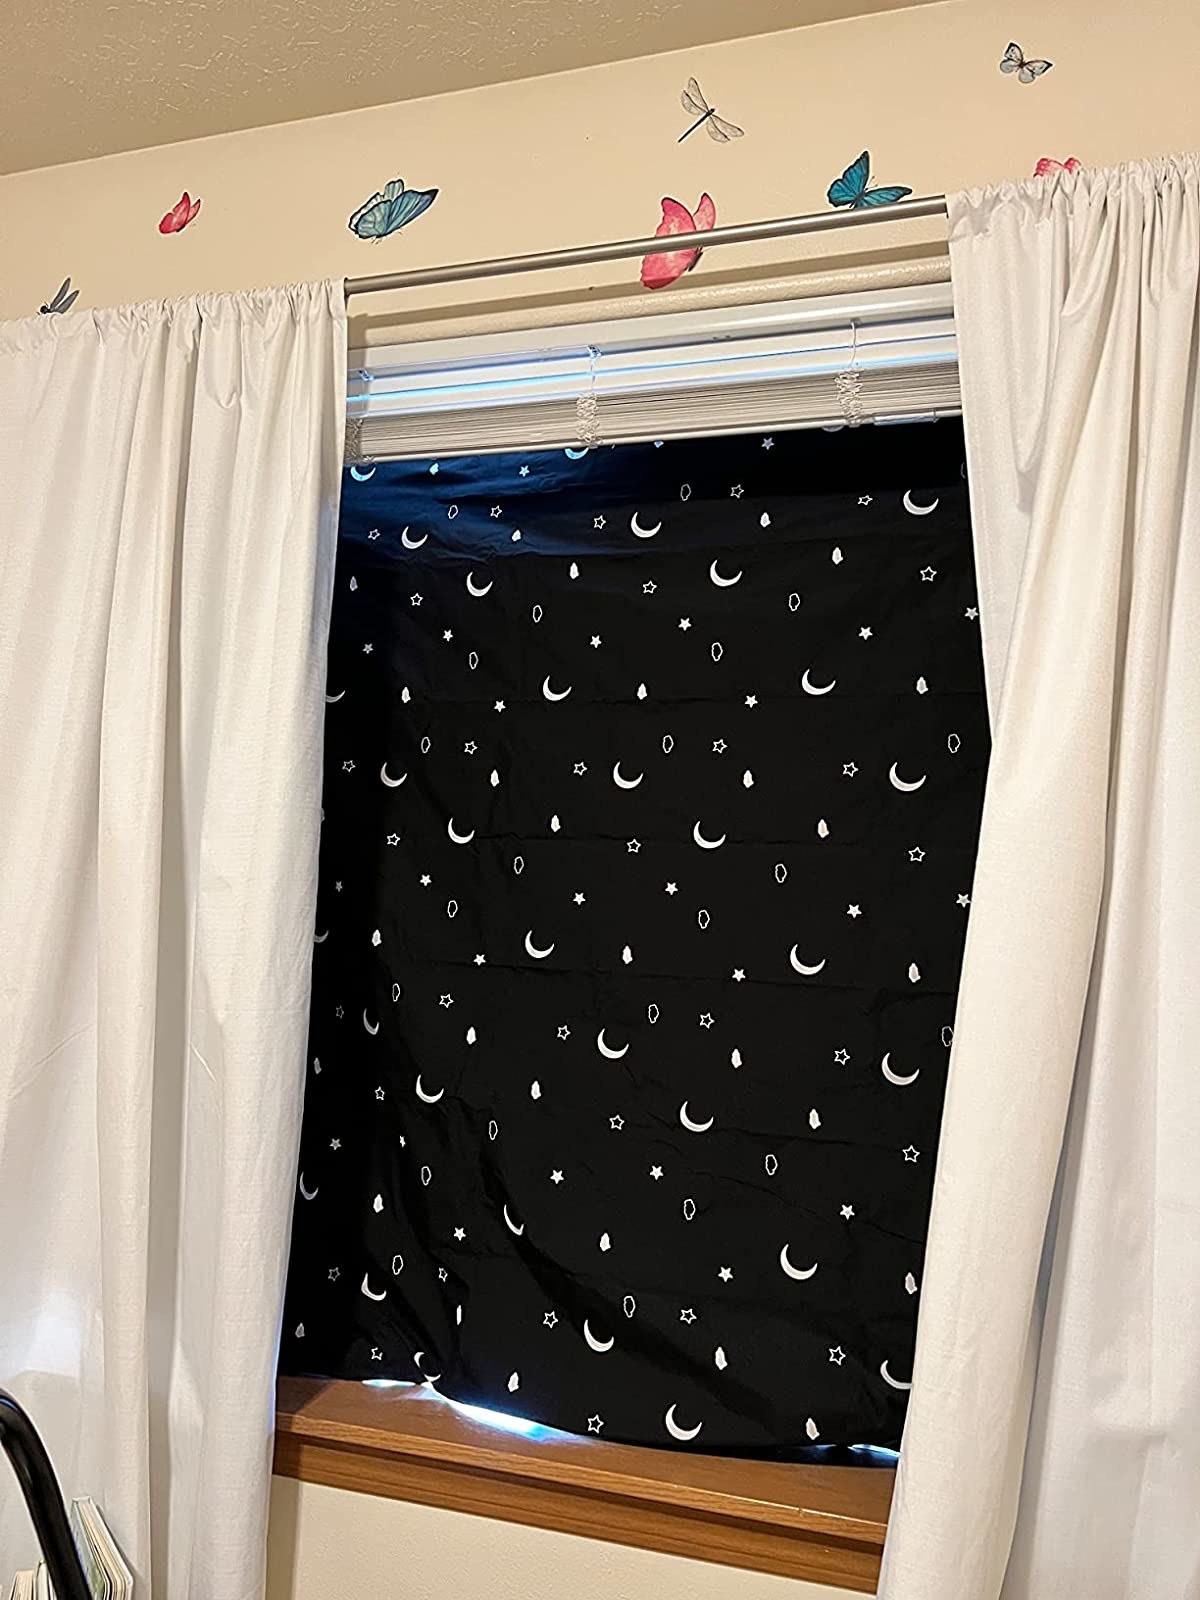 Reviewer image of the blackout curtain on their window